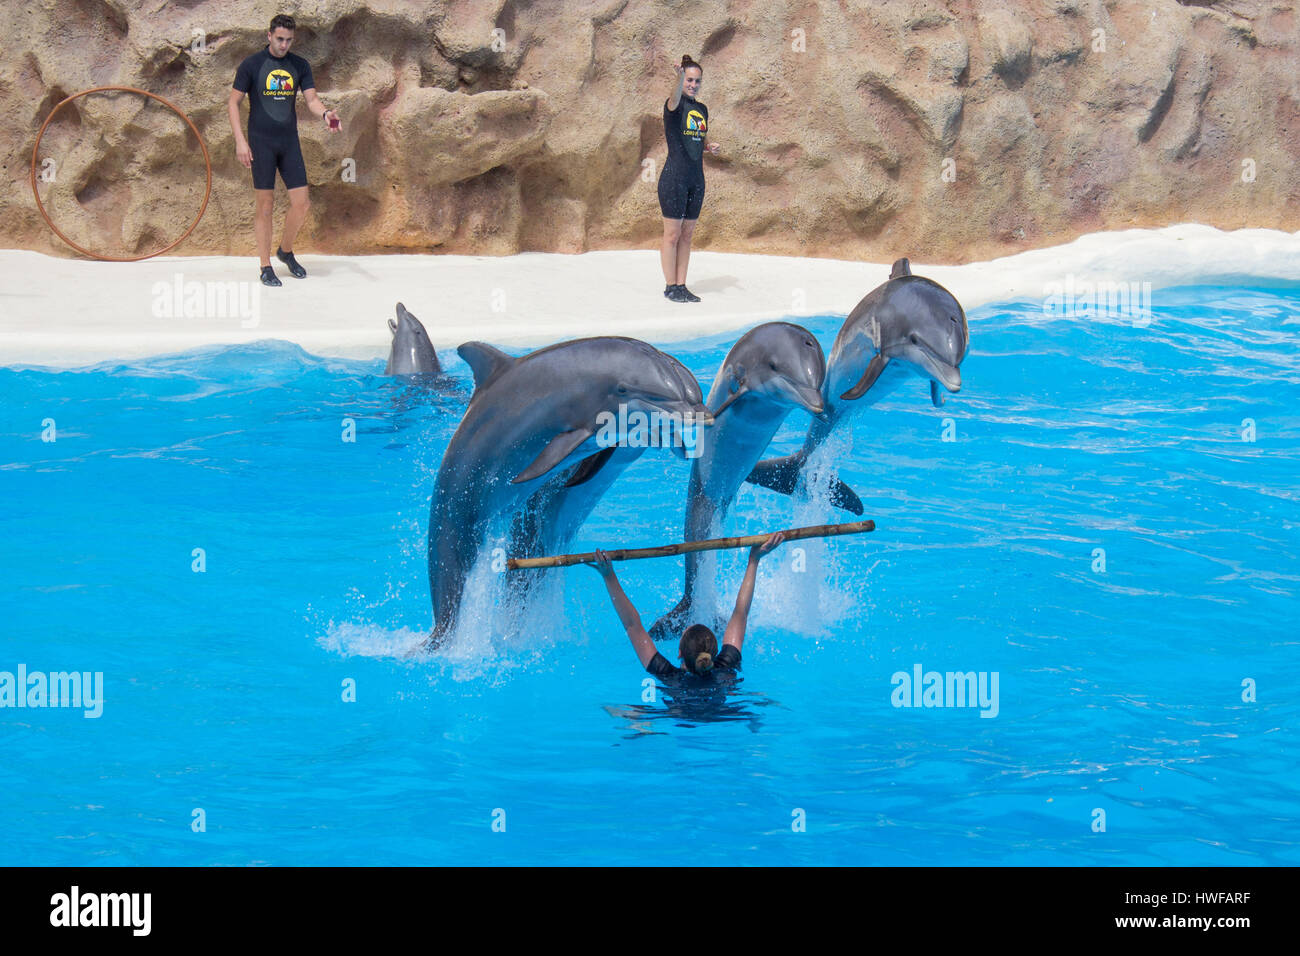 Tenerife, Spain - march 13, 2017: Jumping dolphins at dolphin show at Loro Parque in Tenerife, Spain. Stock Photo